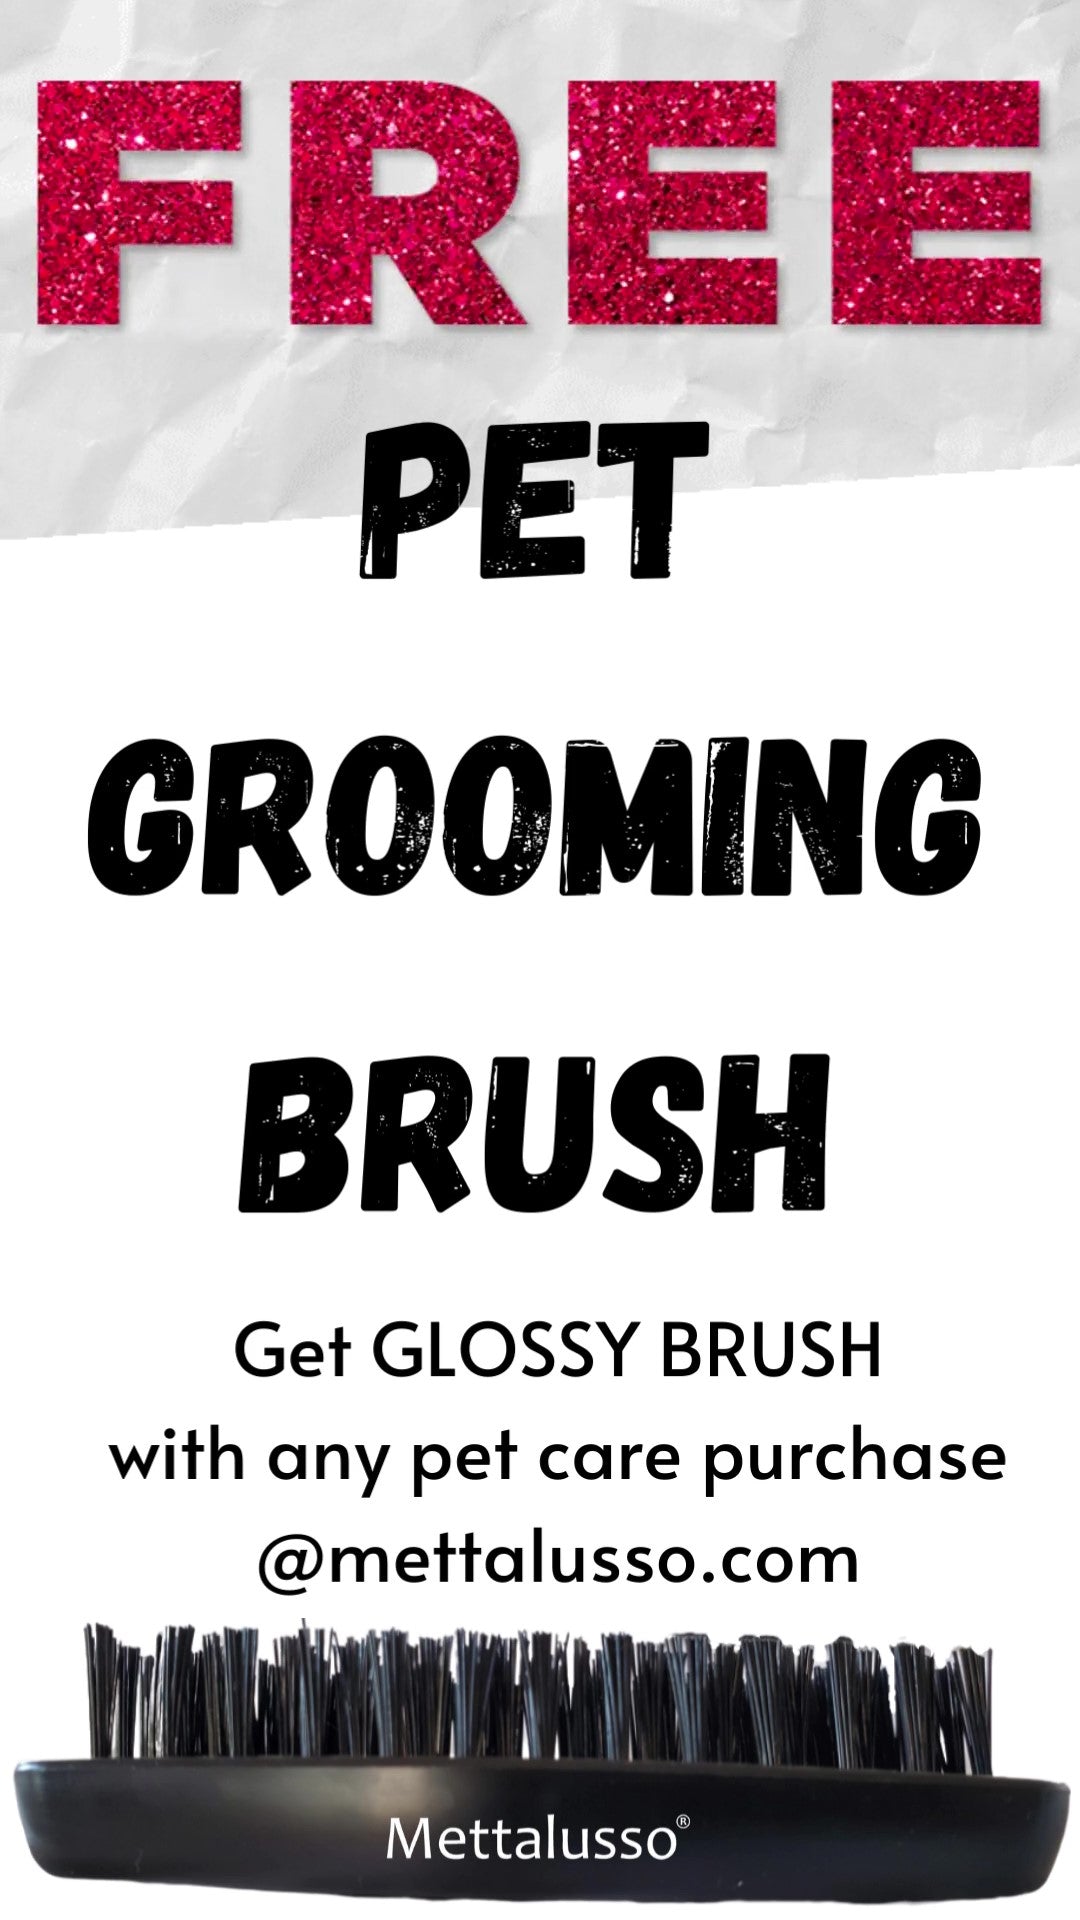 Mettalusso Glossy Brush Free Now With Any Purchase of Pet Grooming Products